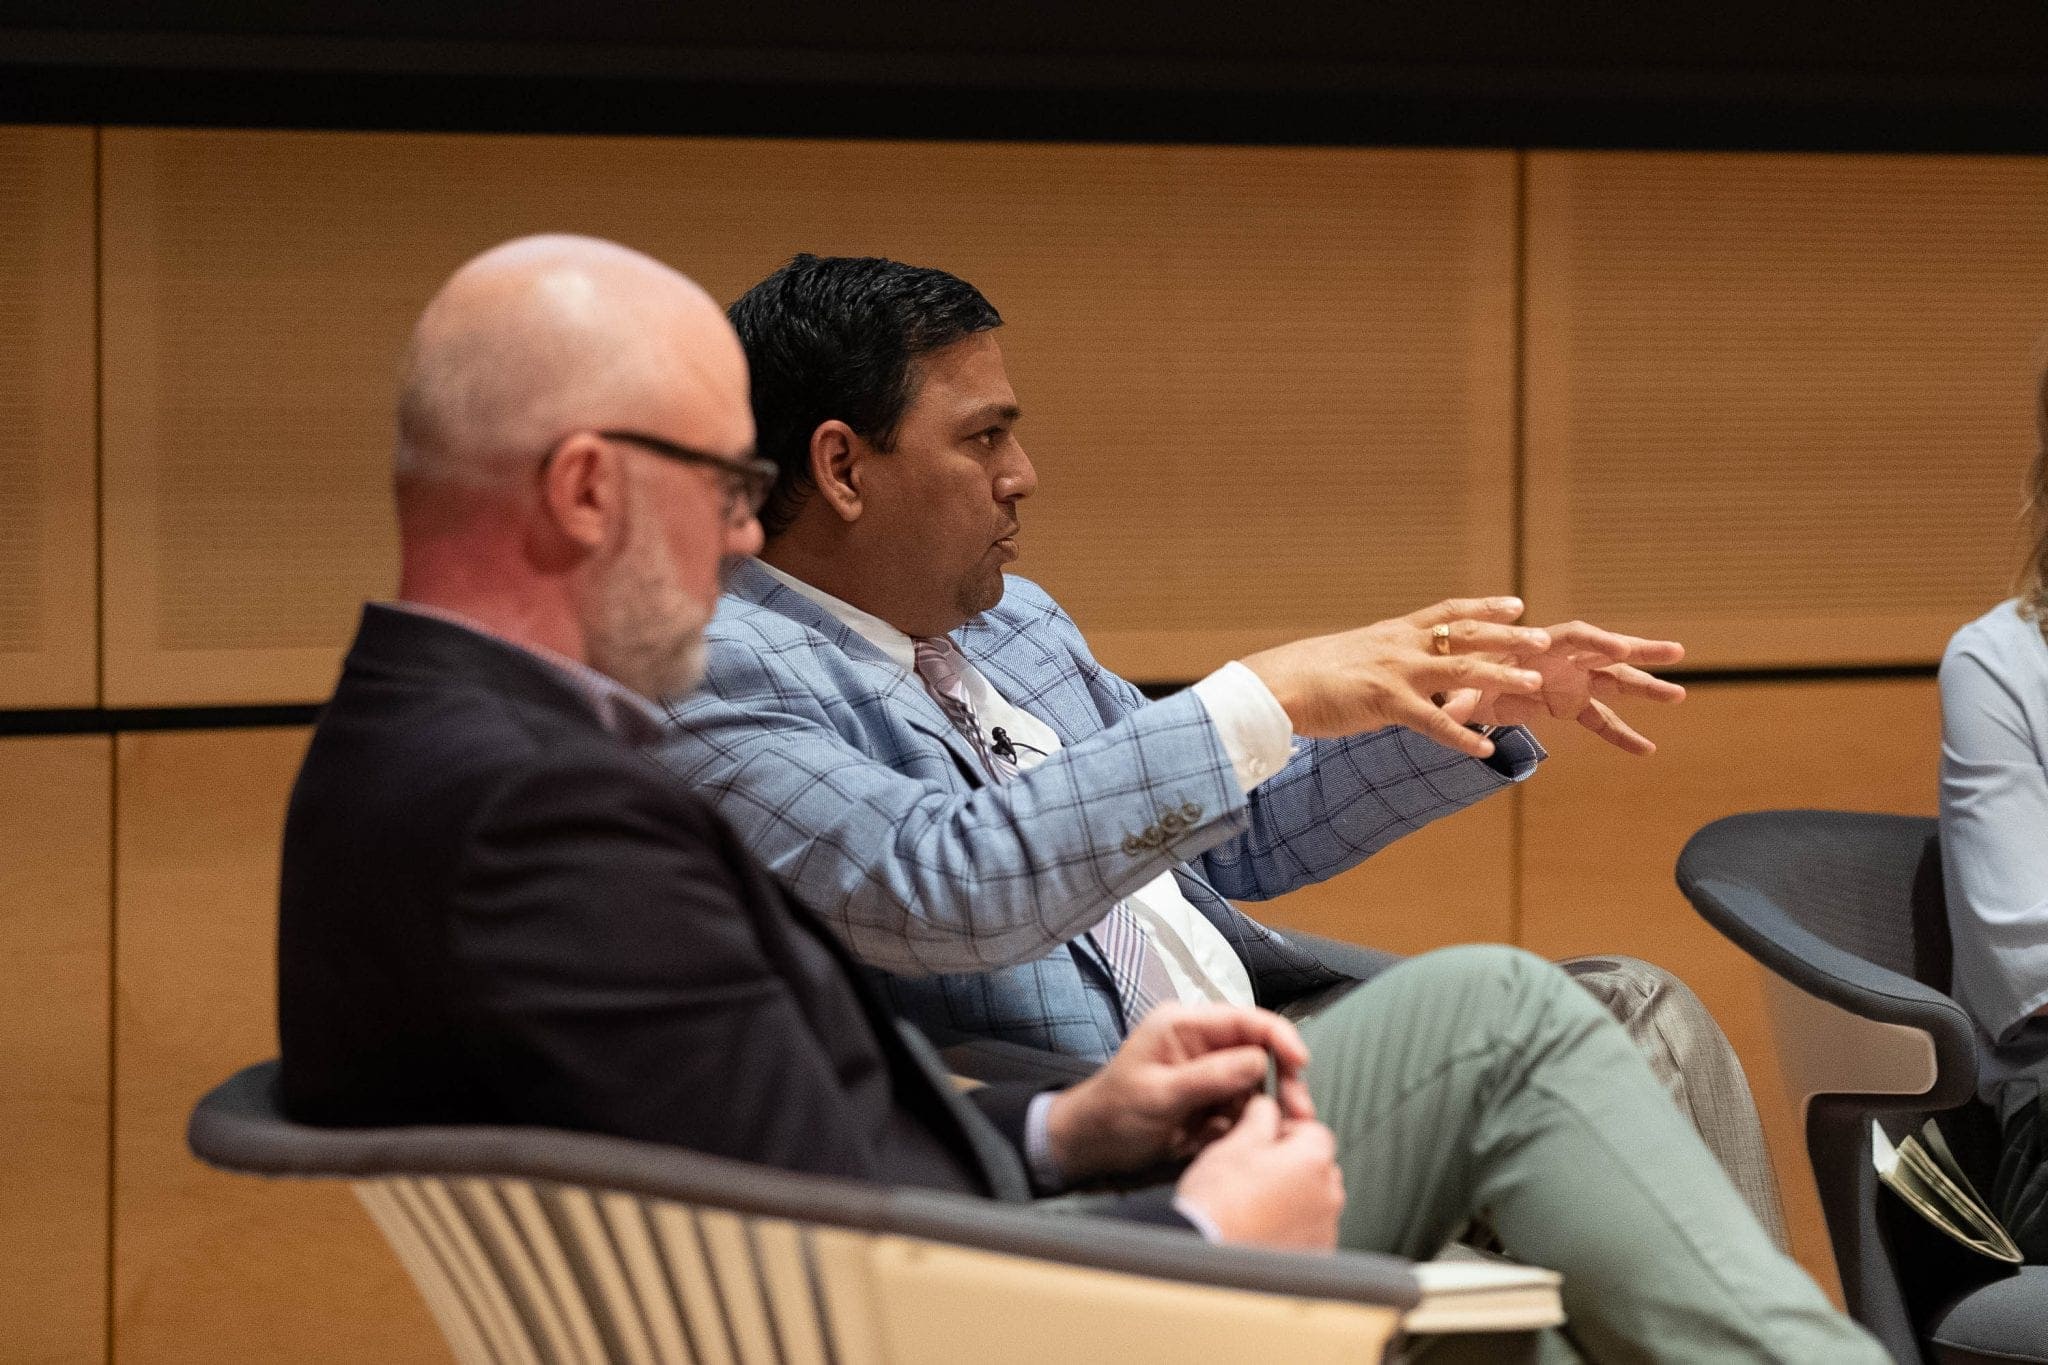 SUNY-Oswego Prof. Arvind Diddi discusses social media's impact on the 2018 midterm elections during the Social Media & Democracy panel on Wednesday.